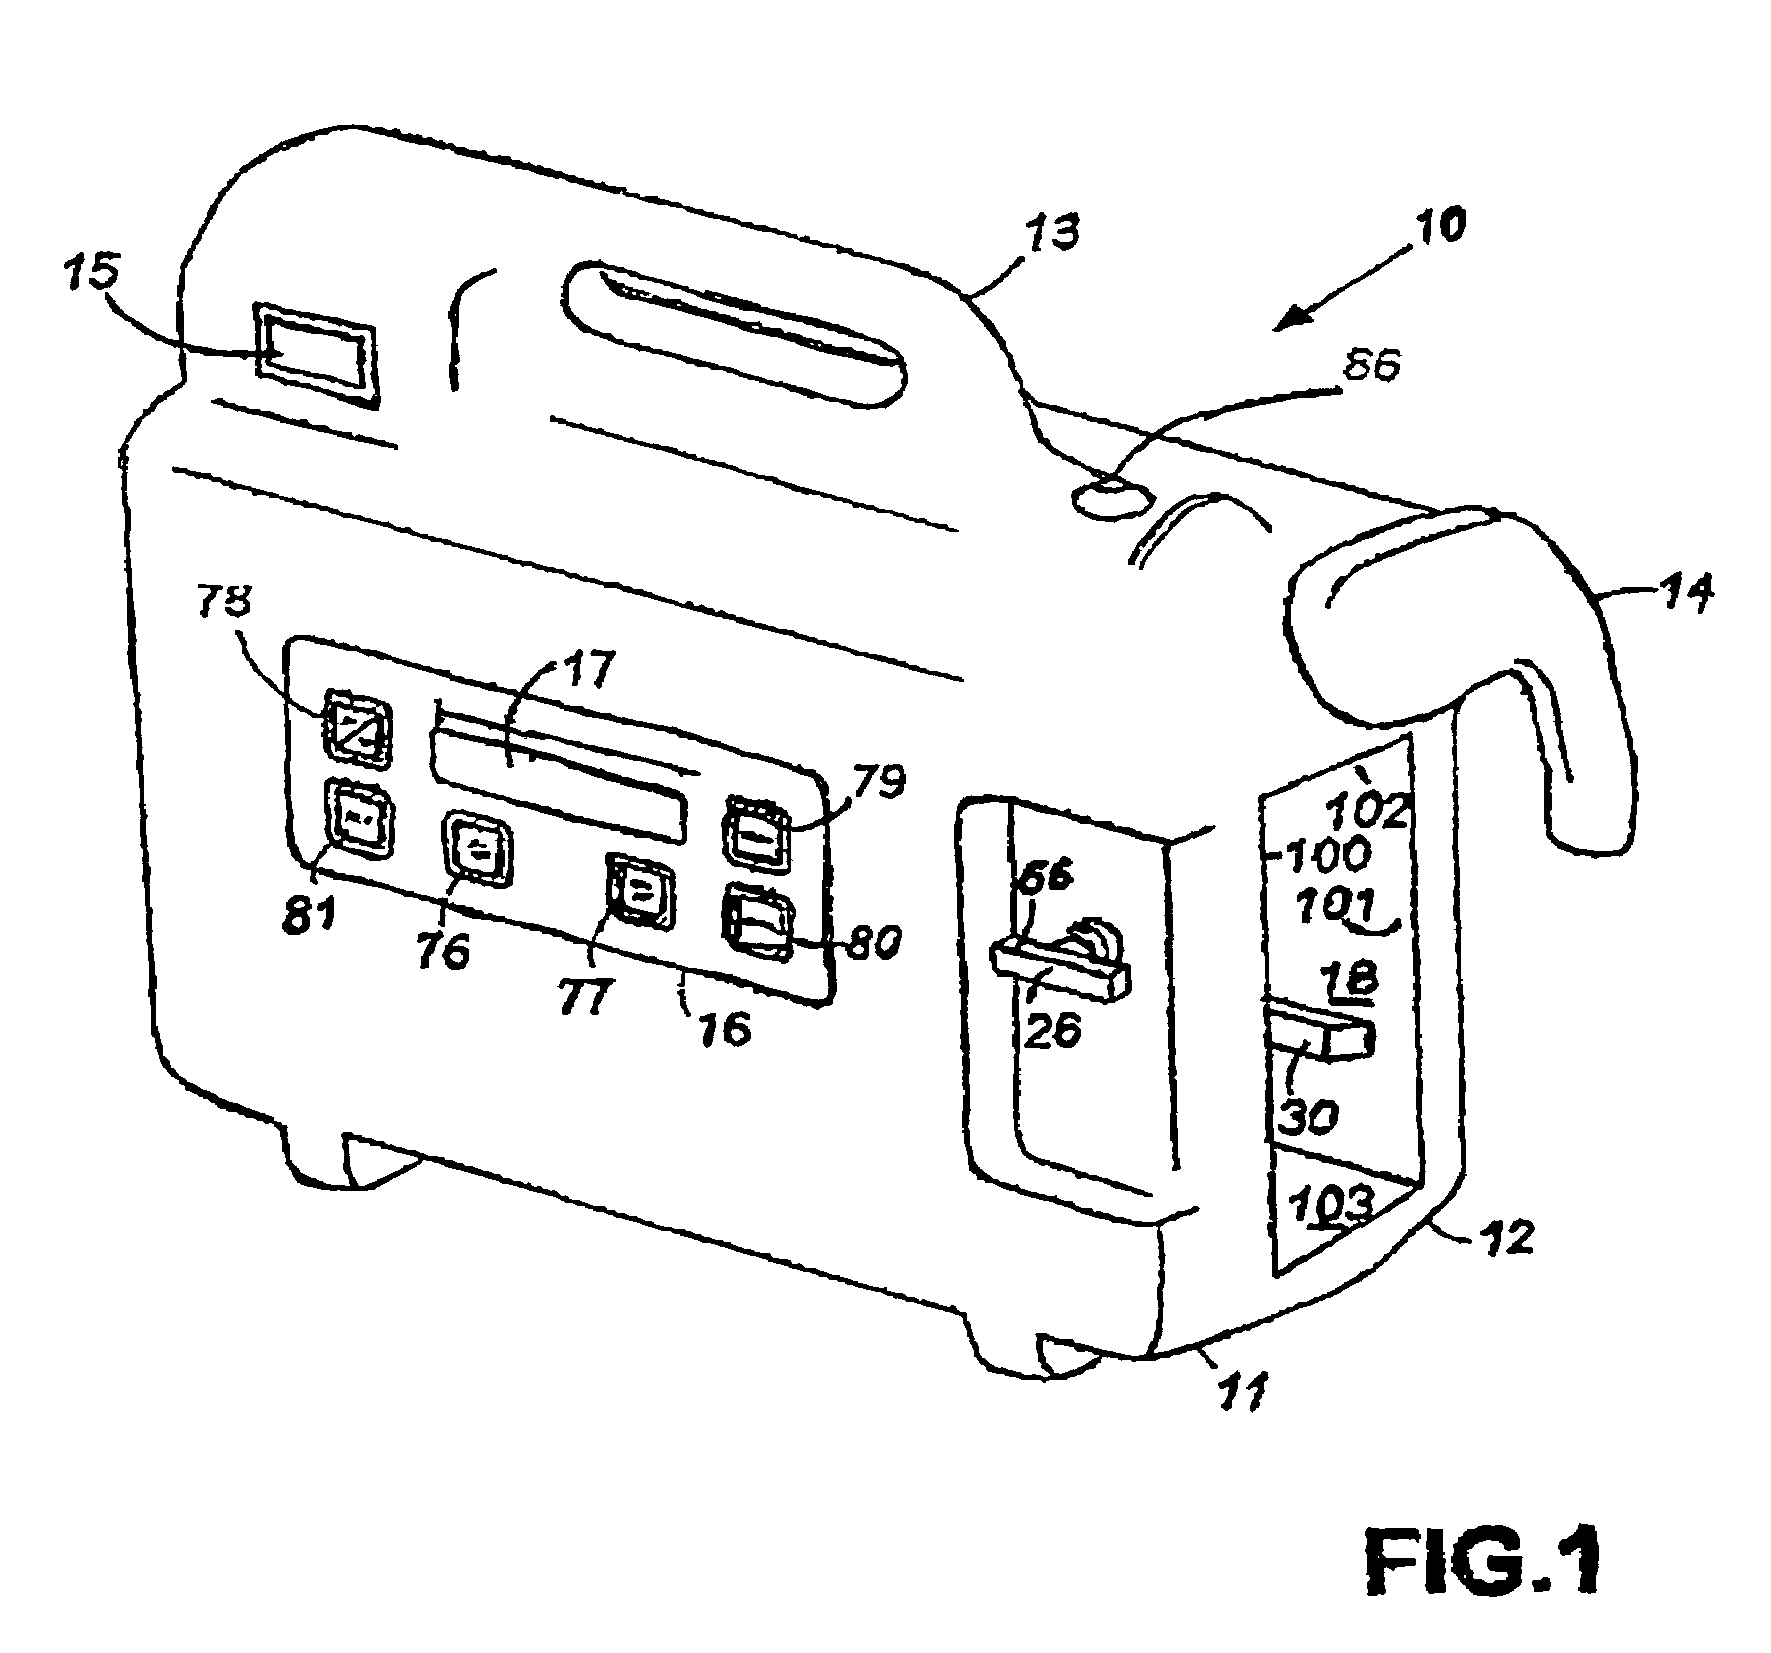 Wound therapy device and related methods